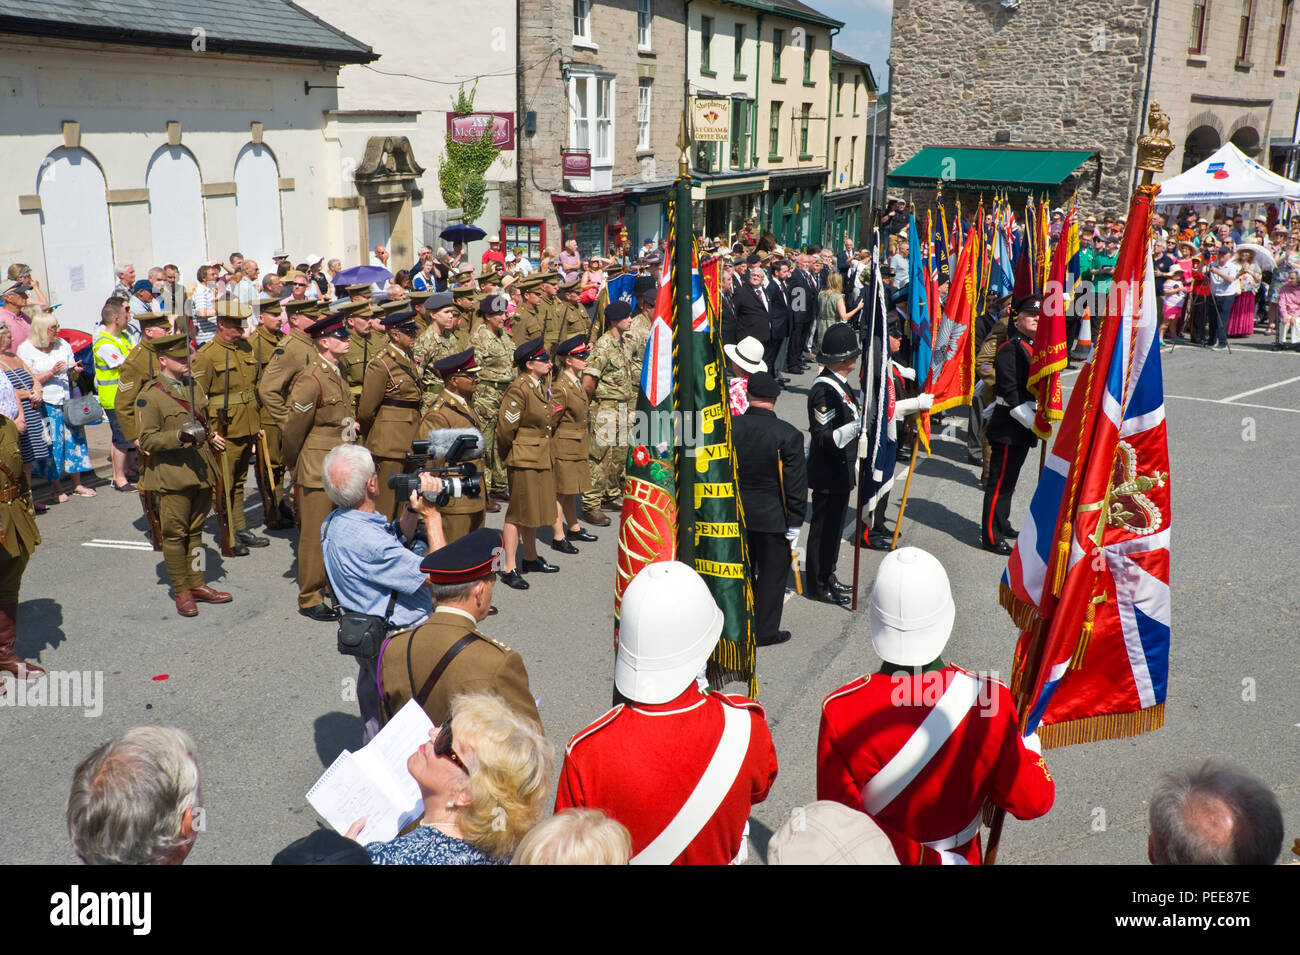 World War One commemorative event ceremony in the market square at Hay-on-Wye Powys Wales UK Stock Photo